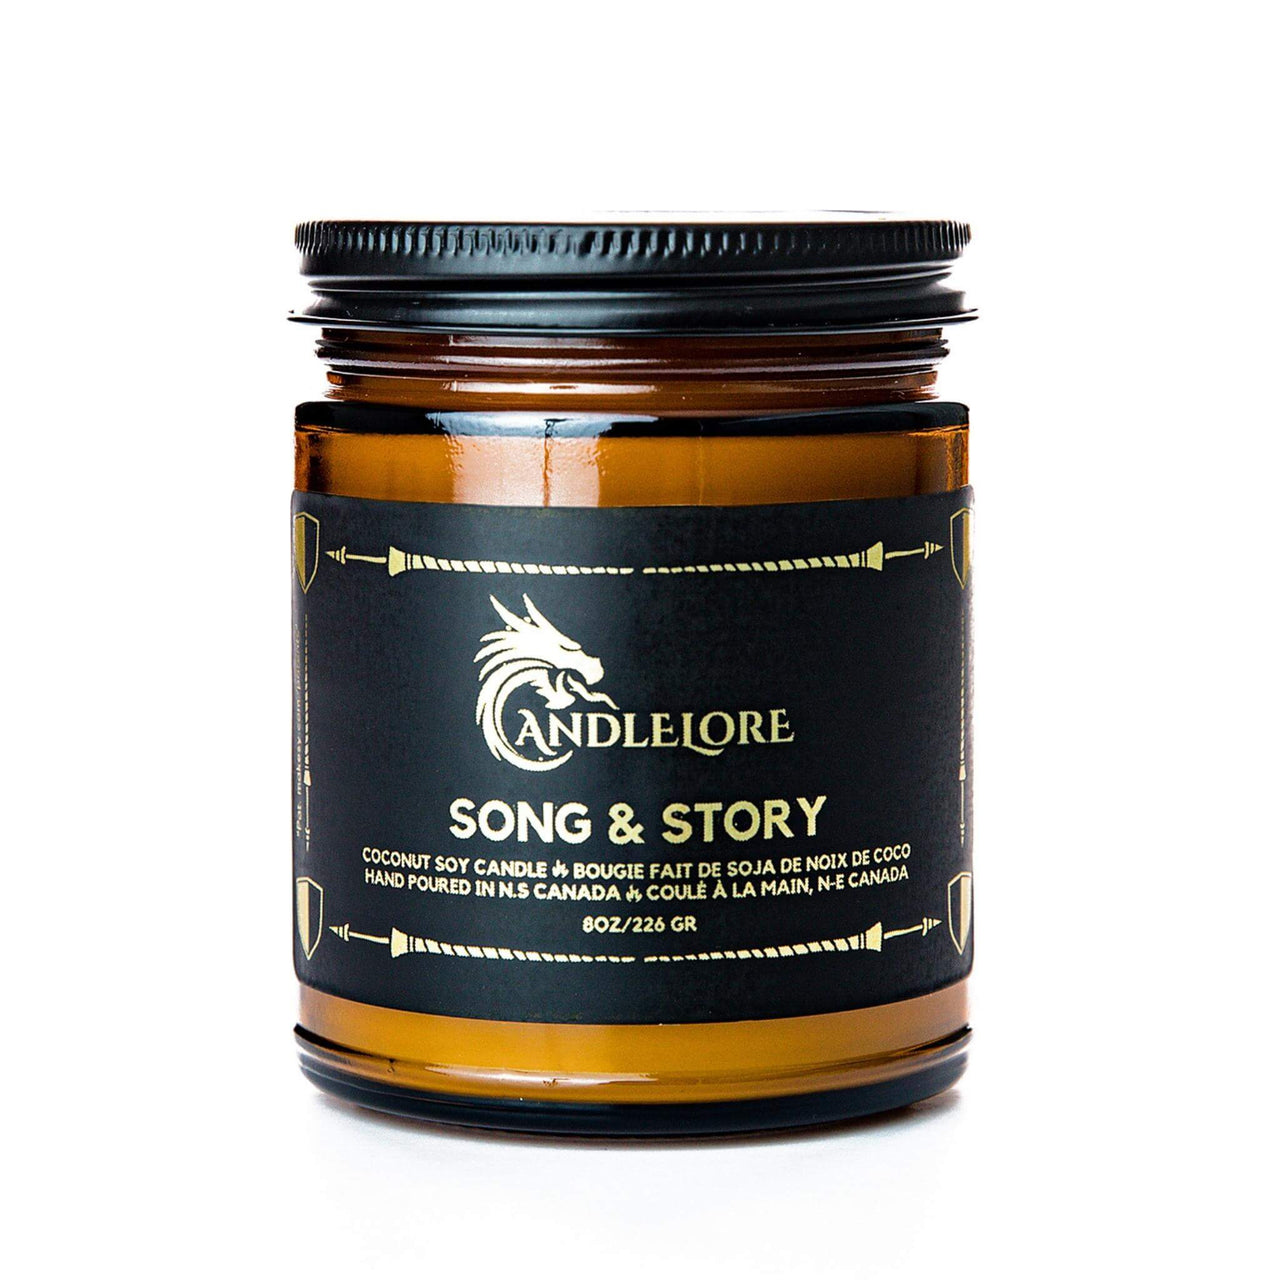 Medium Song & Story scented candle on a white background